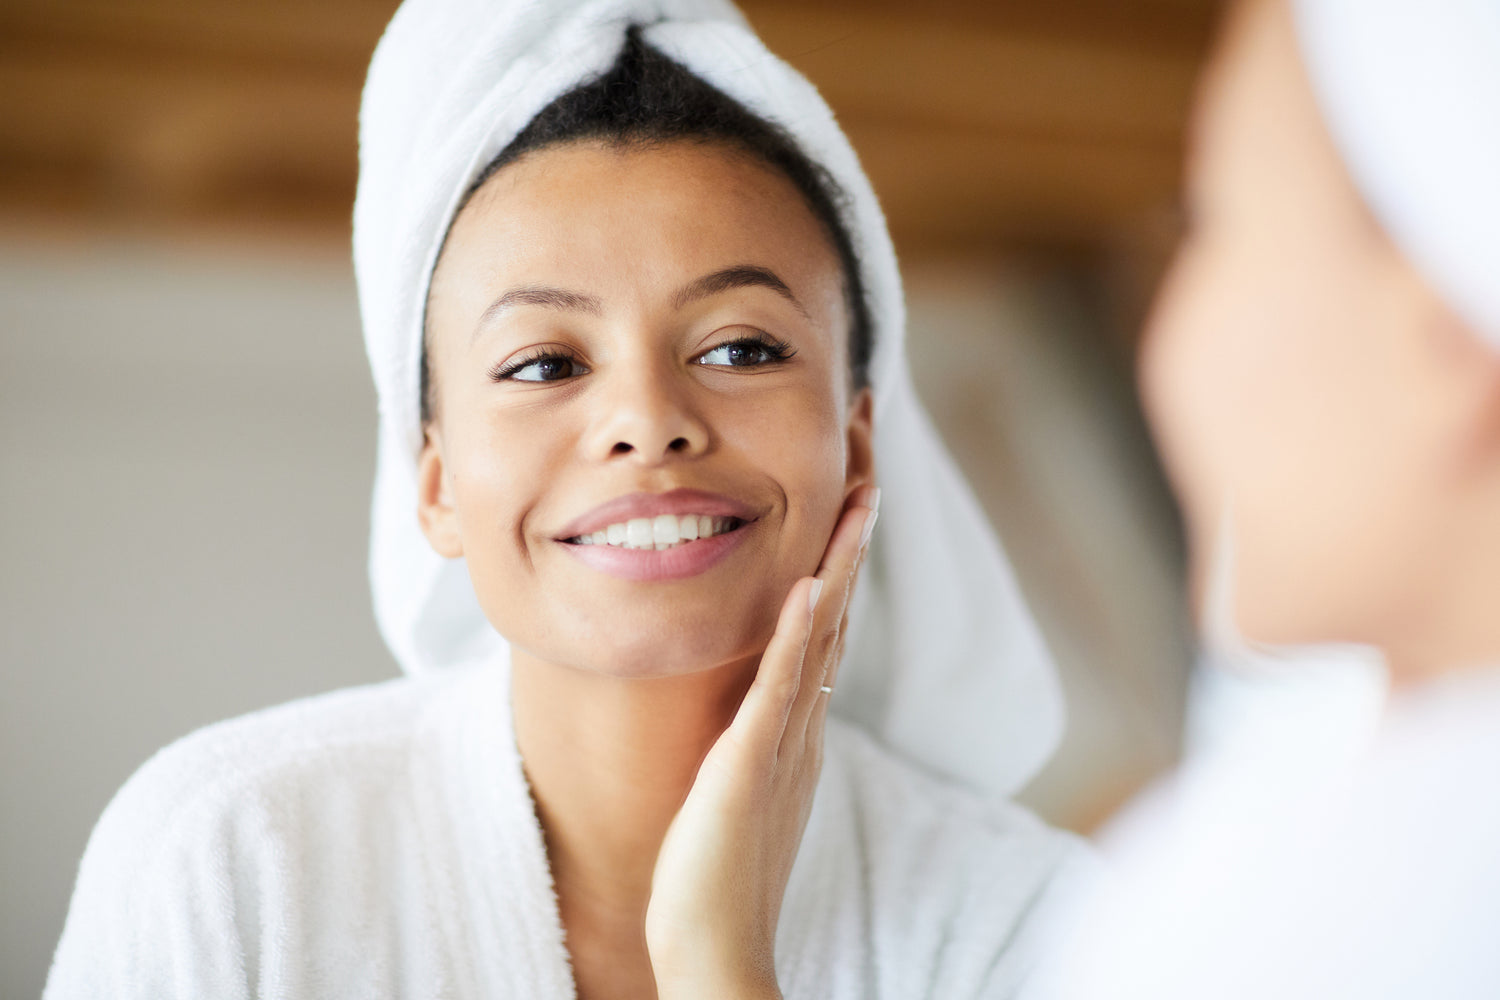 Treat Yourself | 5 At-Home Beauty Treatments